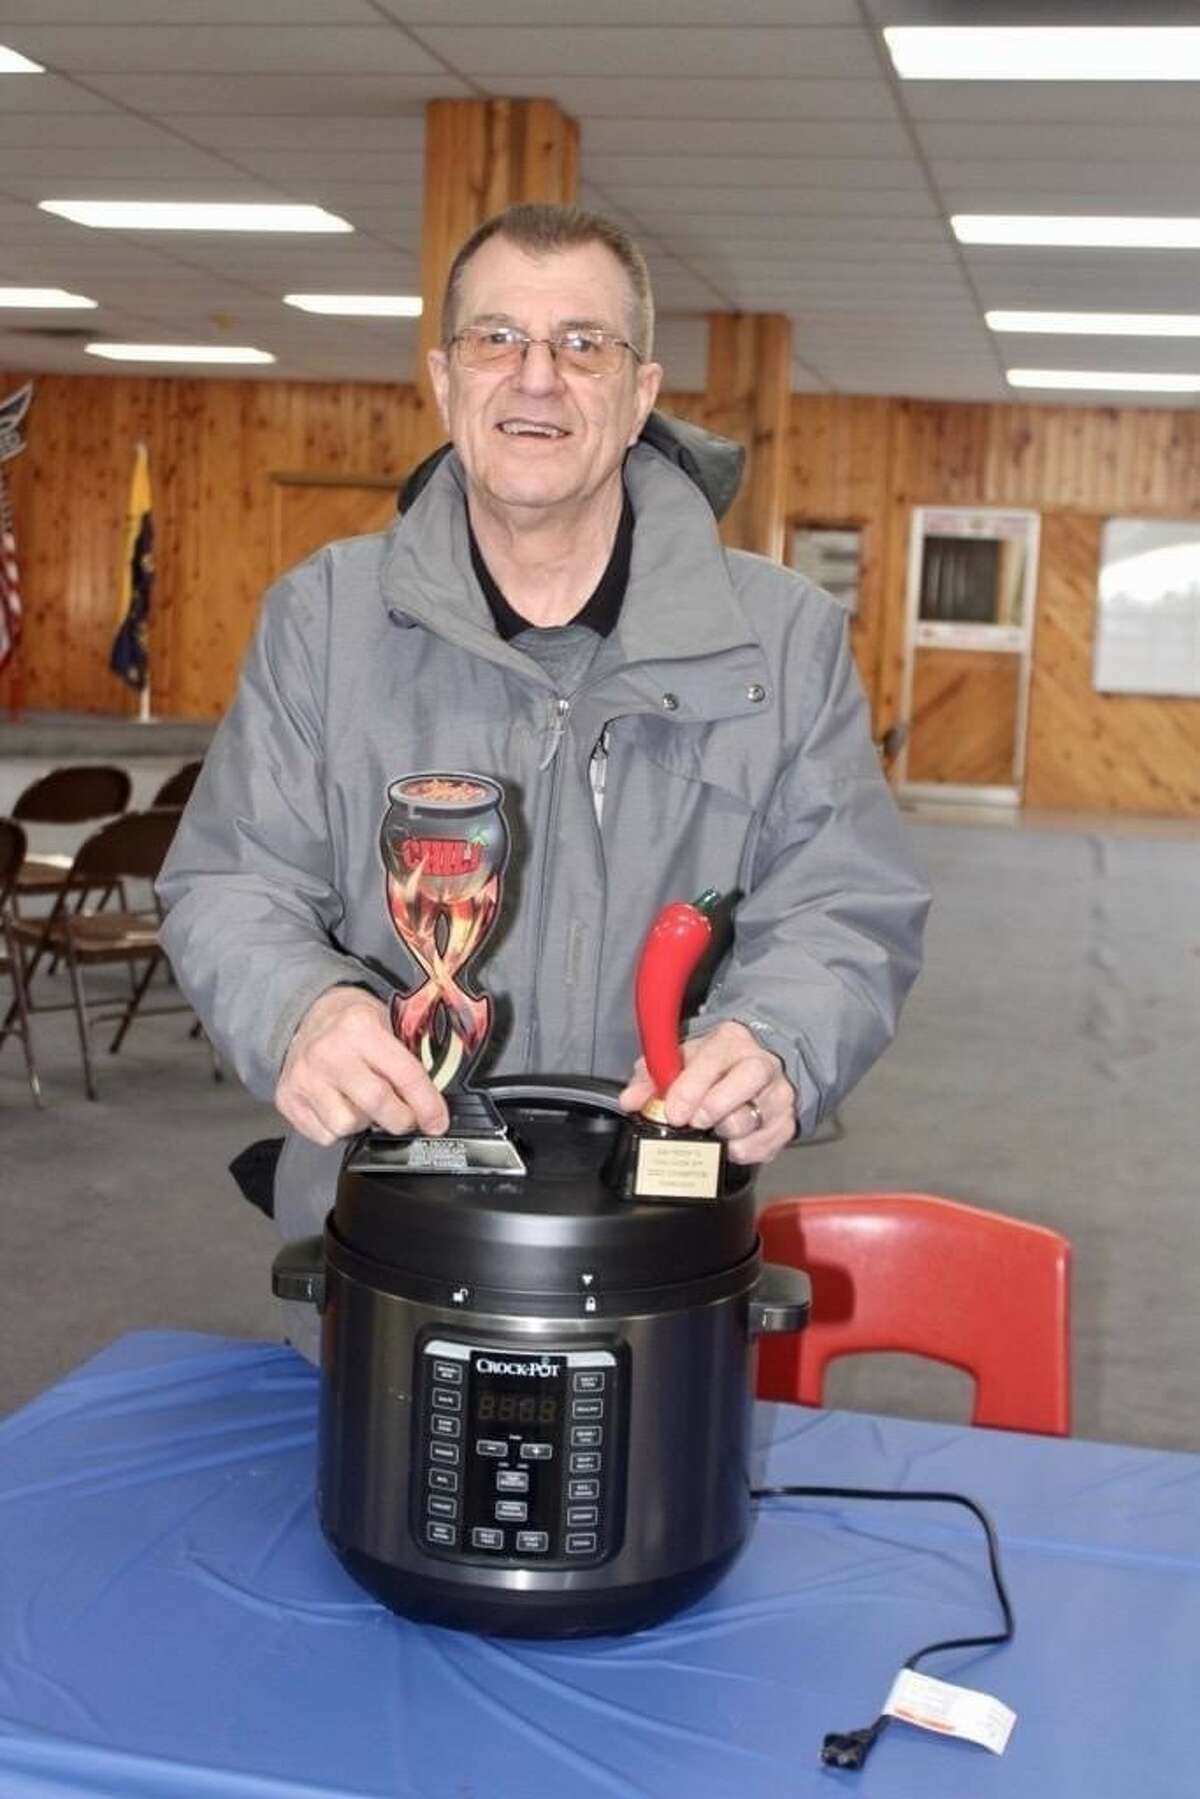 Gary Bailey was awarded the "Best Overall" and "Best Home Cook" honors during the annual BSA Troop 74 chili cookoff in Reed City this weekend.